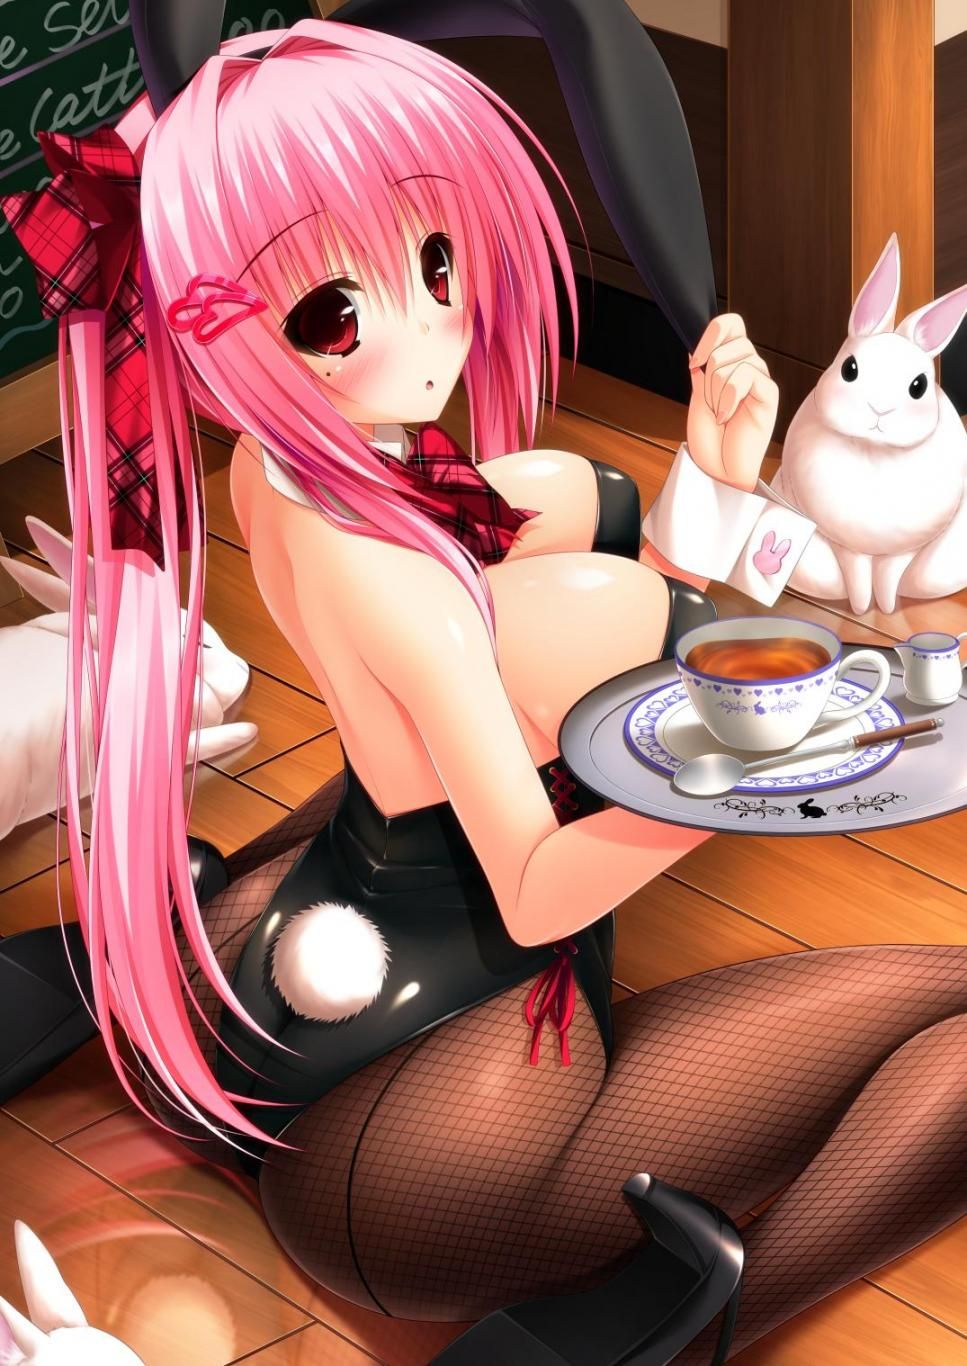 The second image of the bunny girl is too it. 26